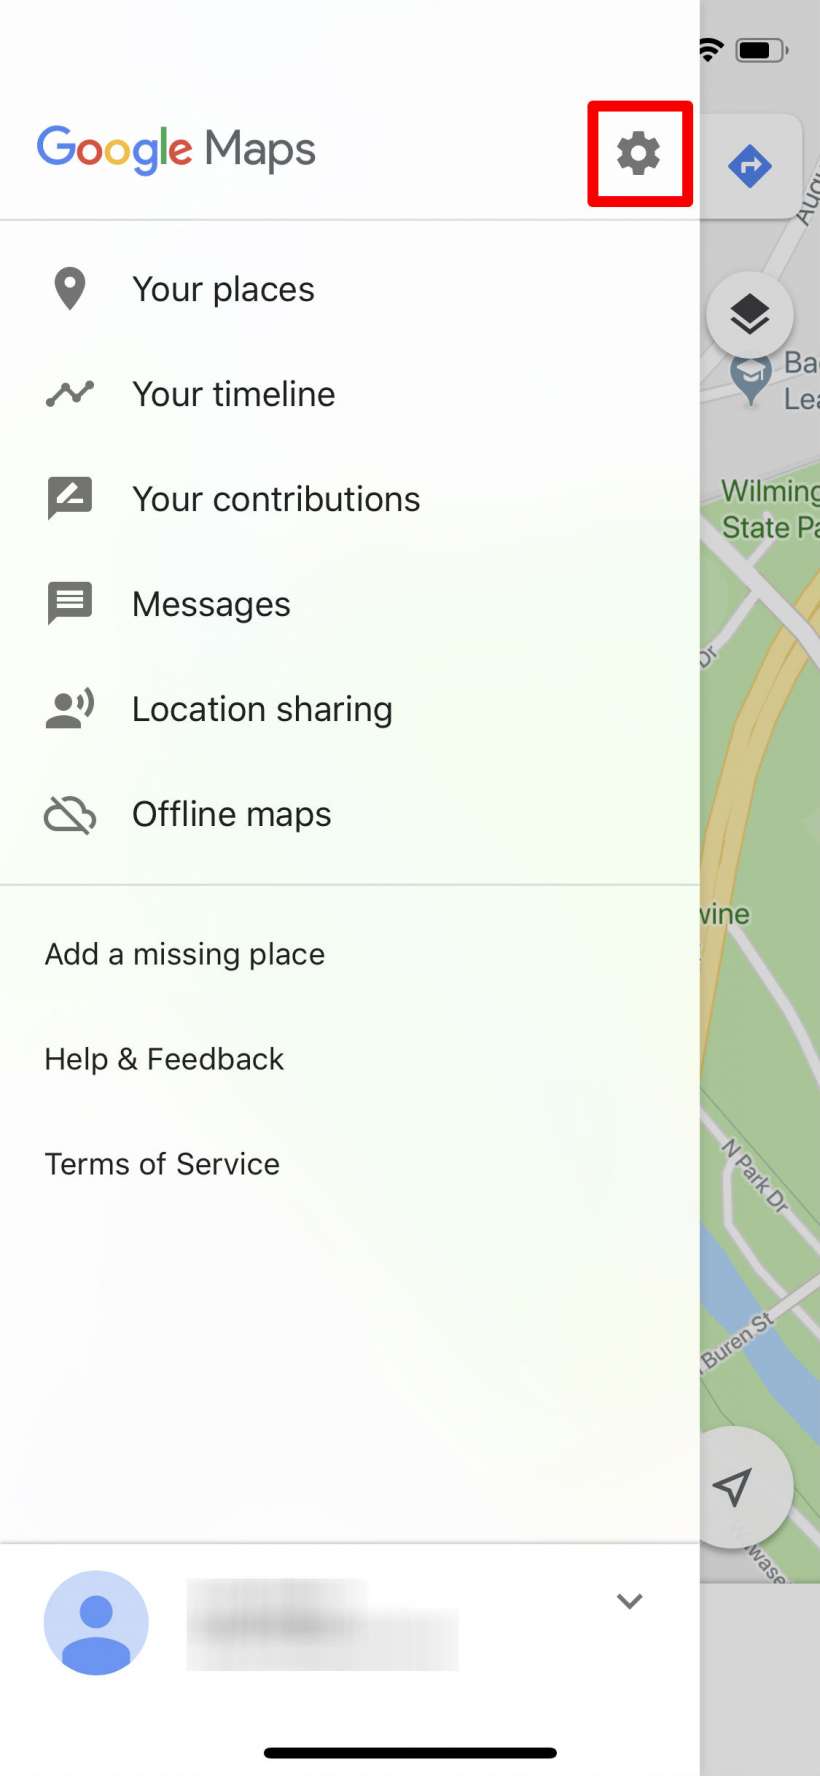 How to turn off turn-by-turn voice directions in Google Maps on iPhone.